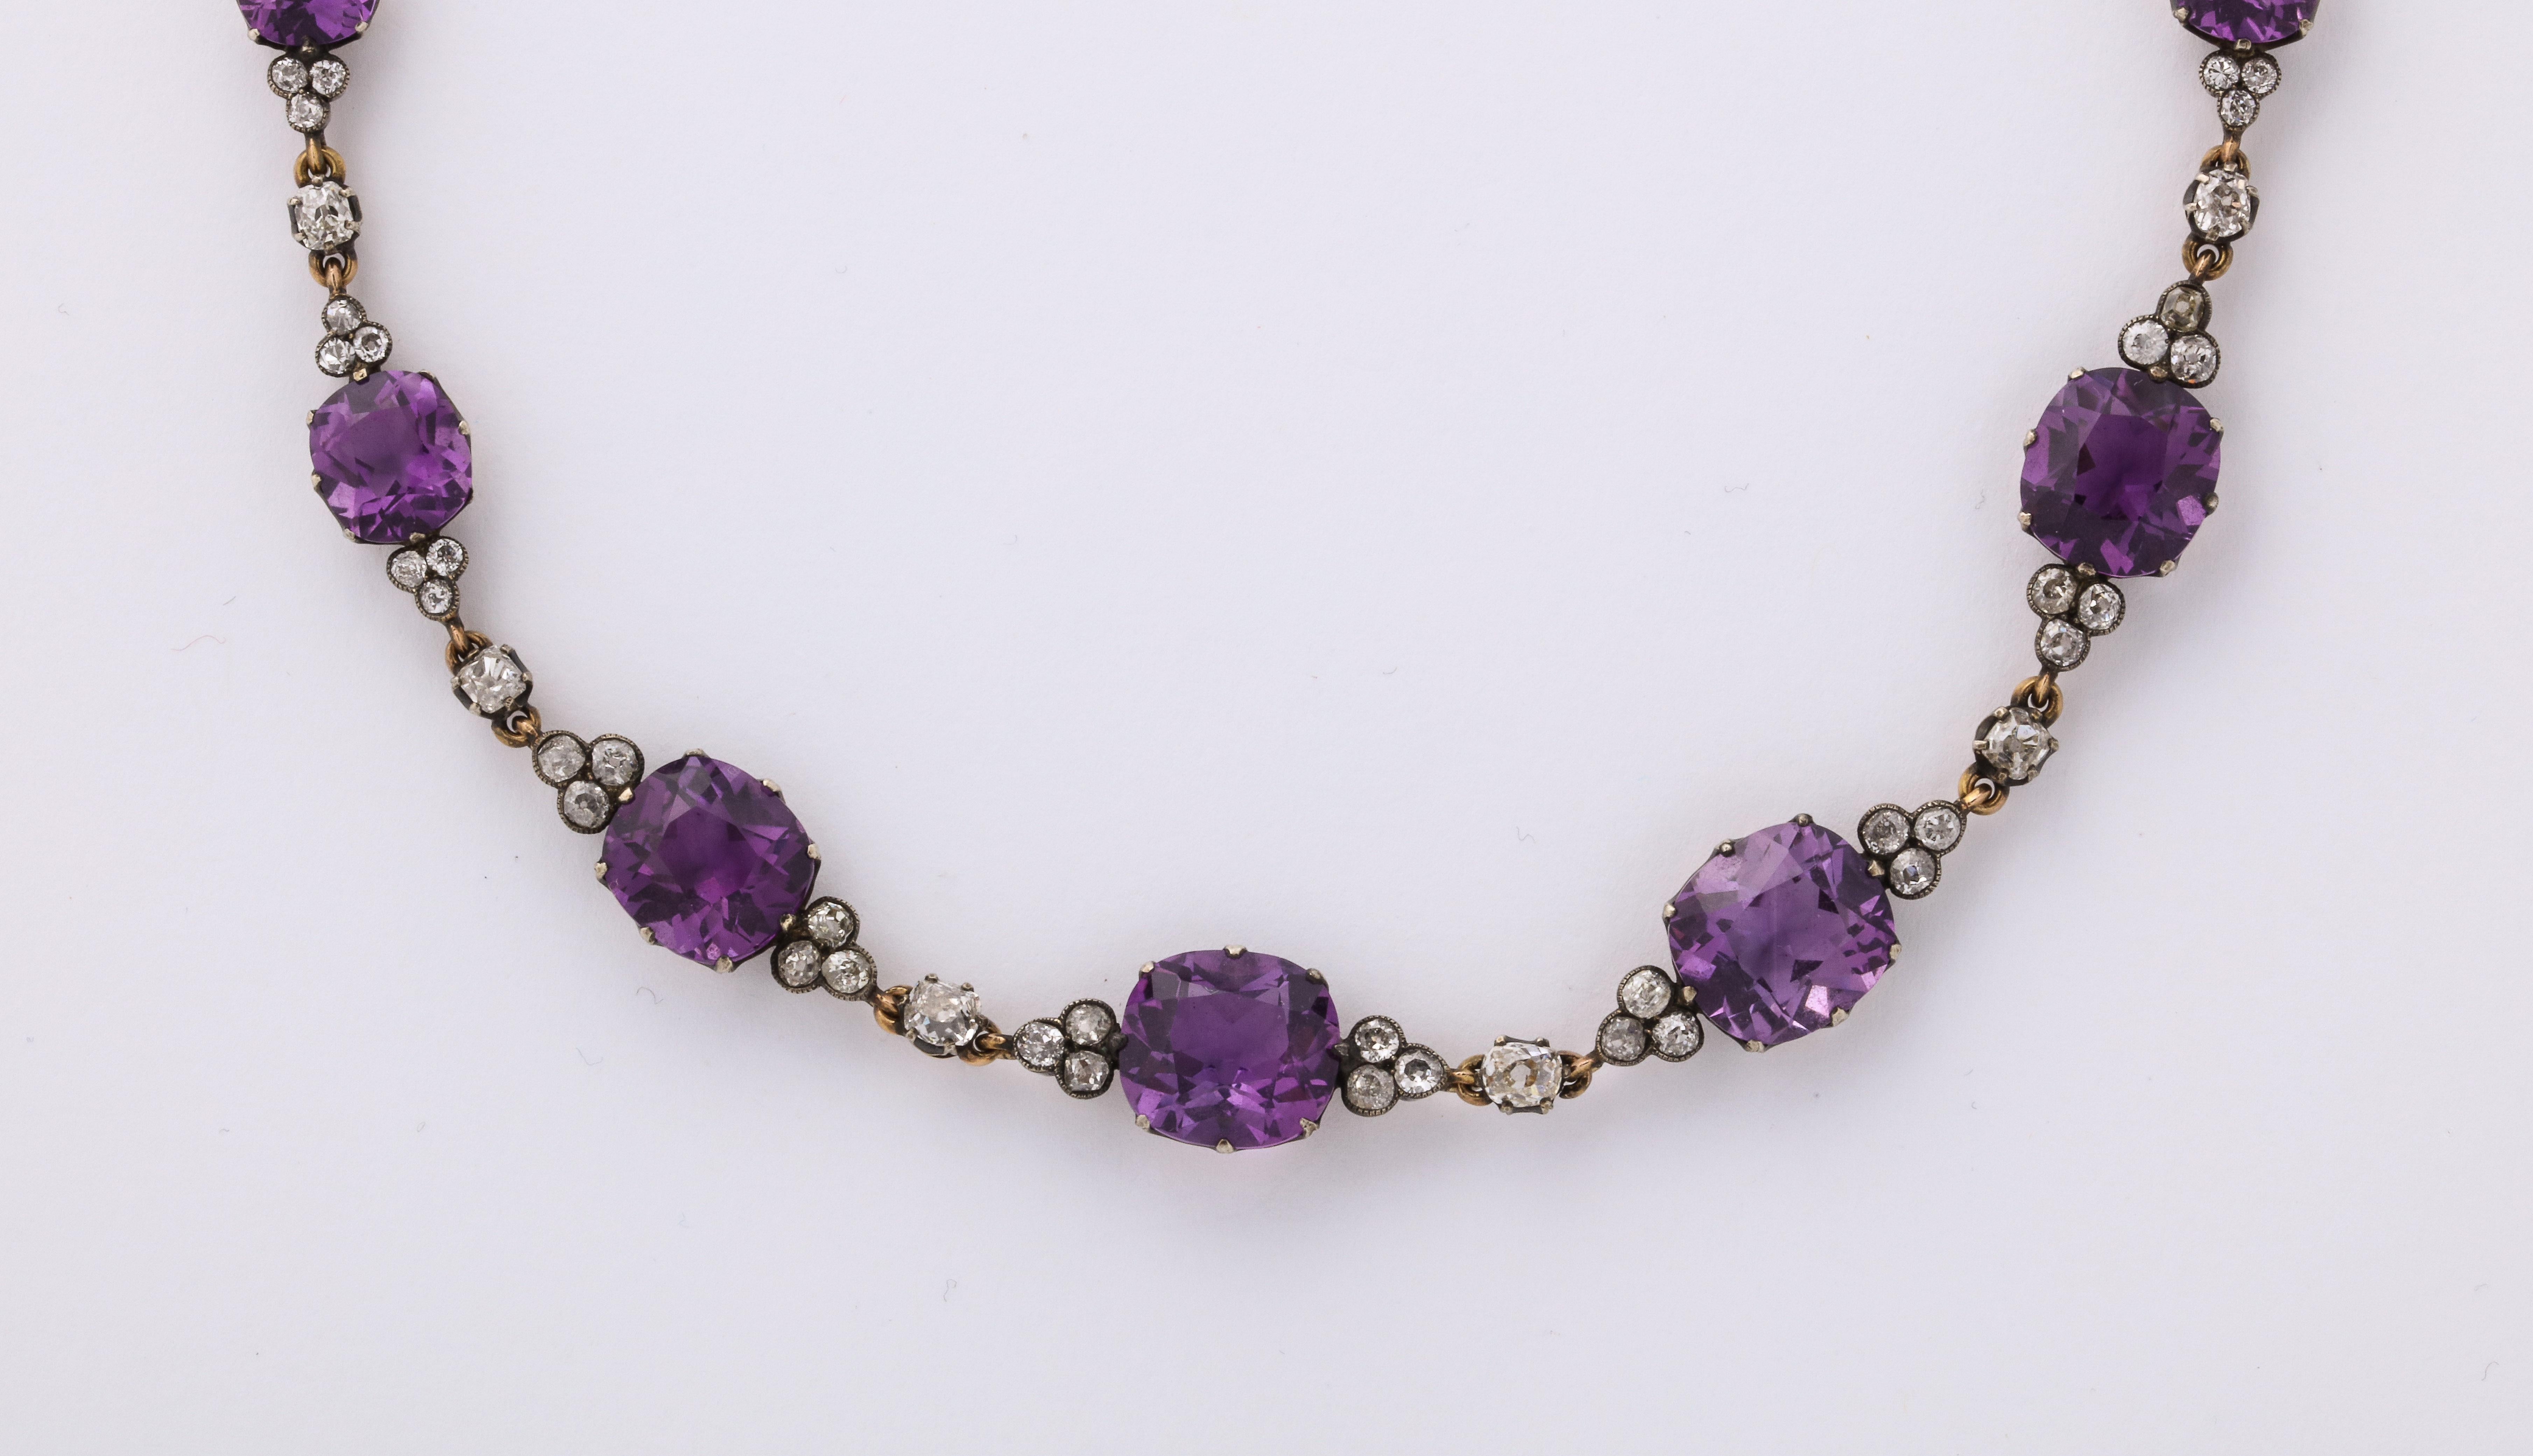 The necklace is set with 13 amethysts and approximately 4 carats of old mine cut diamonds. Hallmarked with Russian assay and maker's mark. Clasp is a long oval amethyst. c.1890